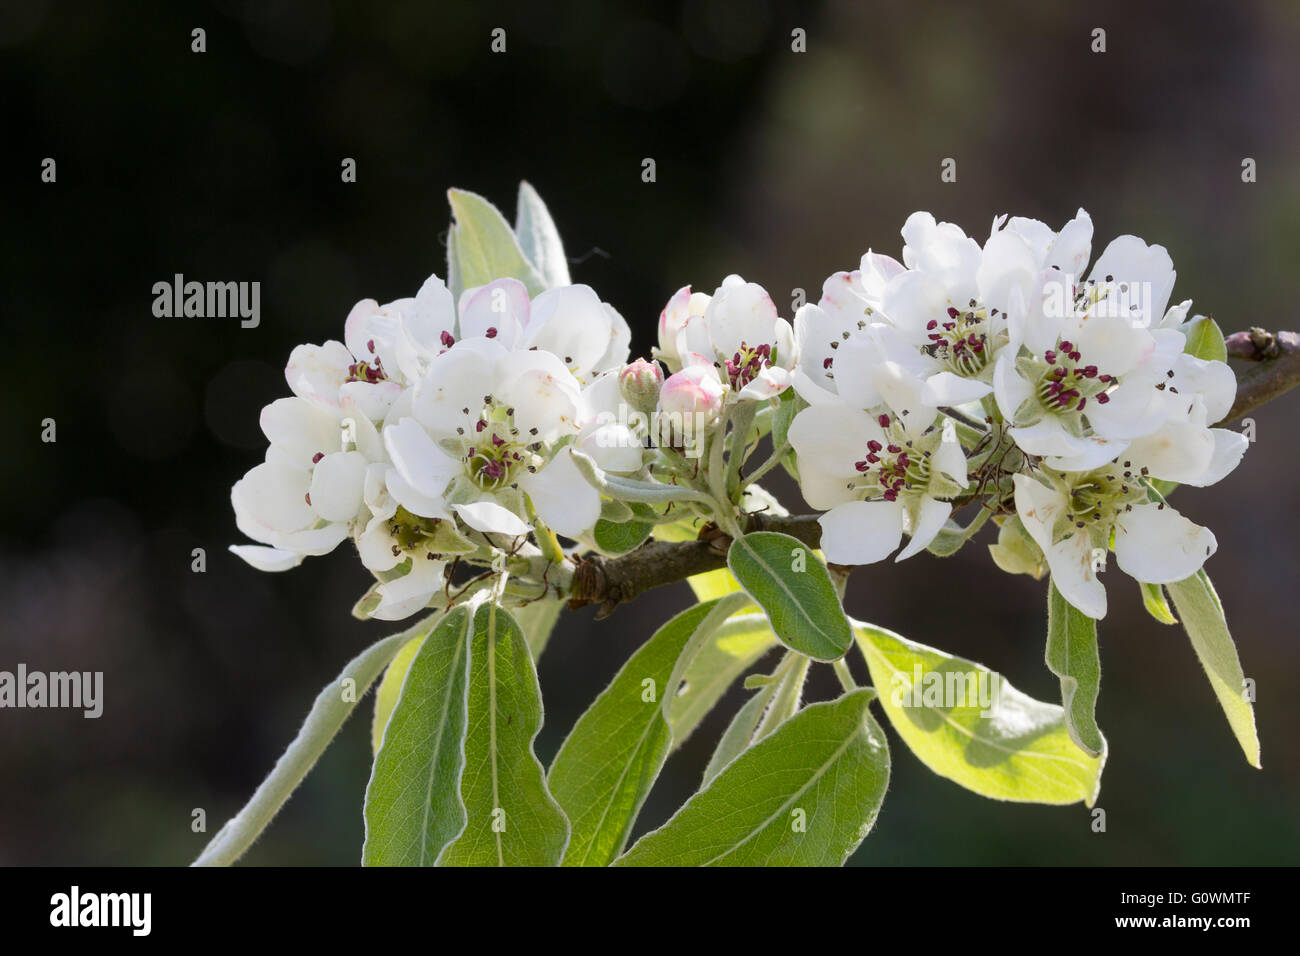 White spring blossom of the Mediterranean snow pear, Pyrus nivalis, a small deciduous tree Stock Photo